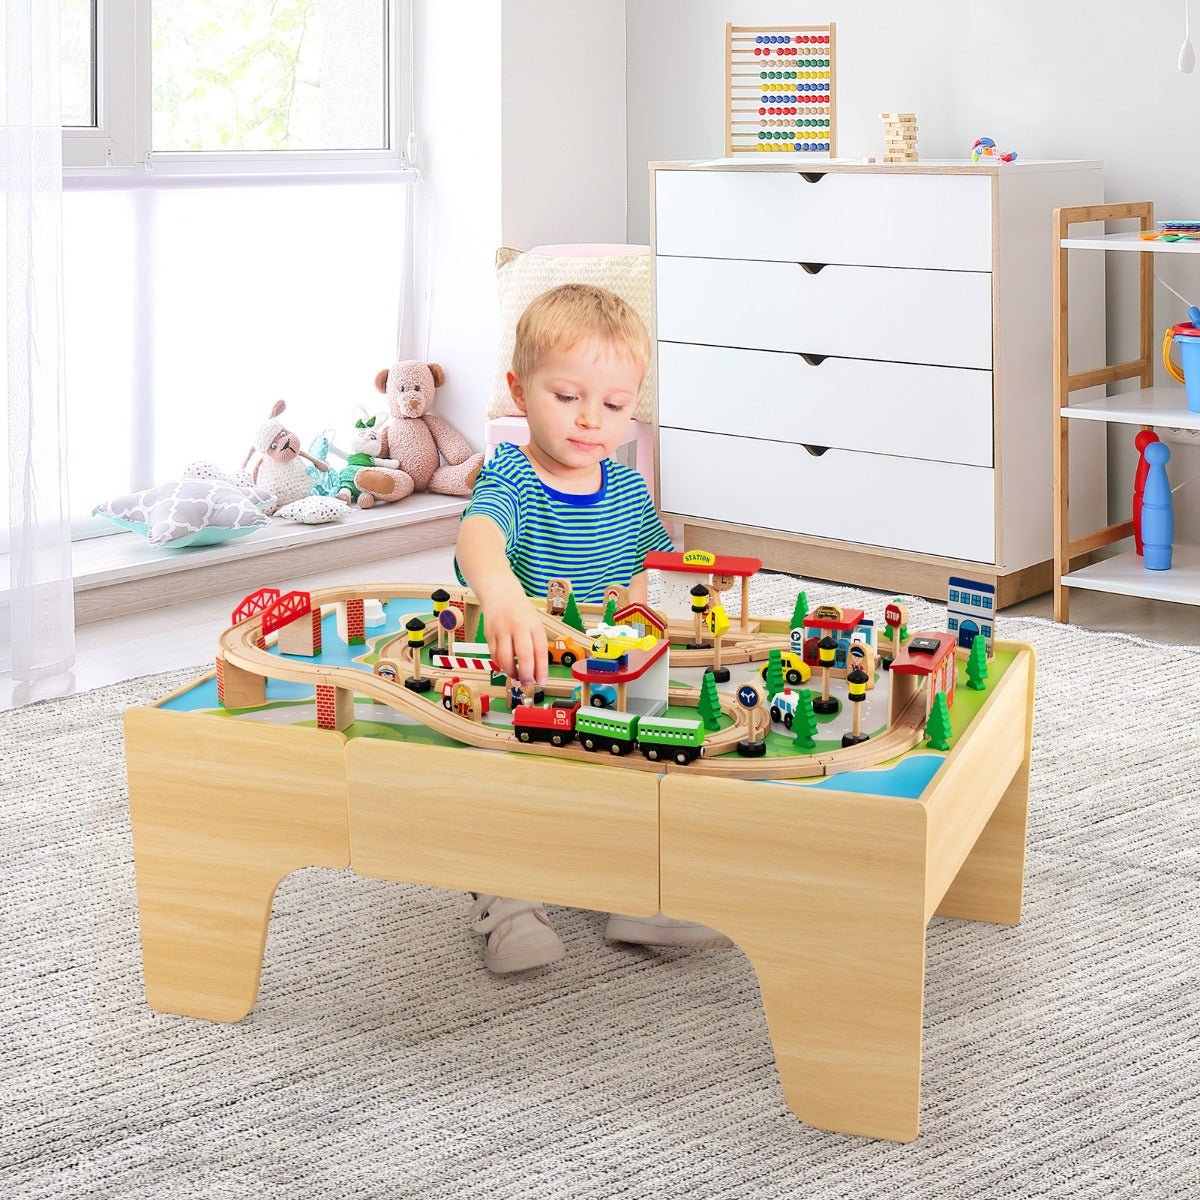 All Aboard for Playtime: Natural Wooden Train Set